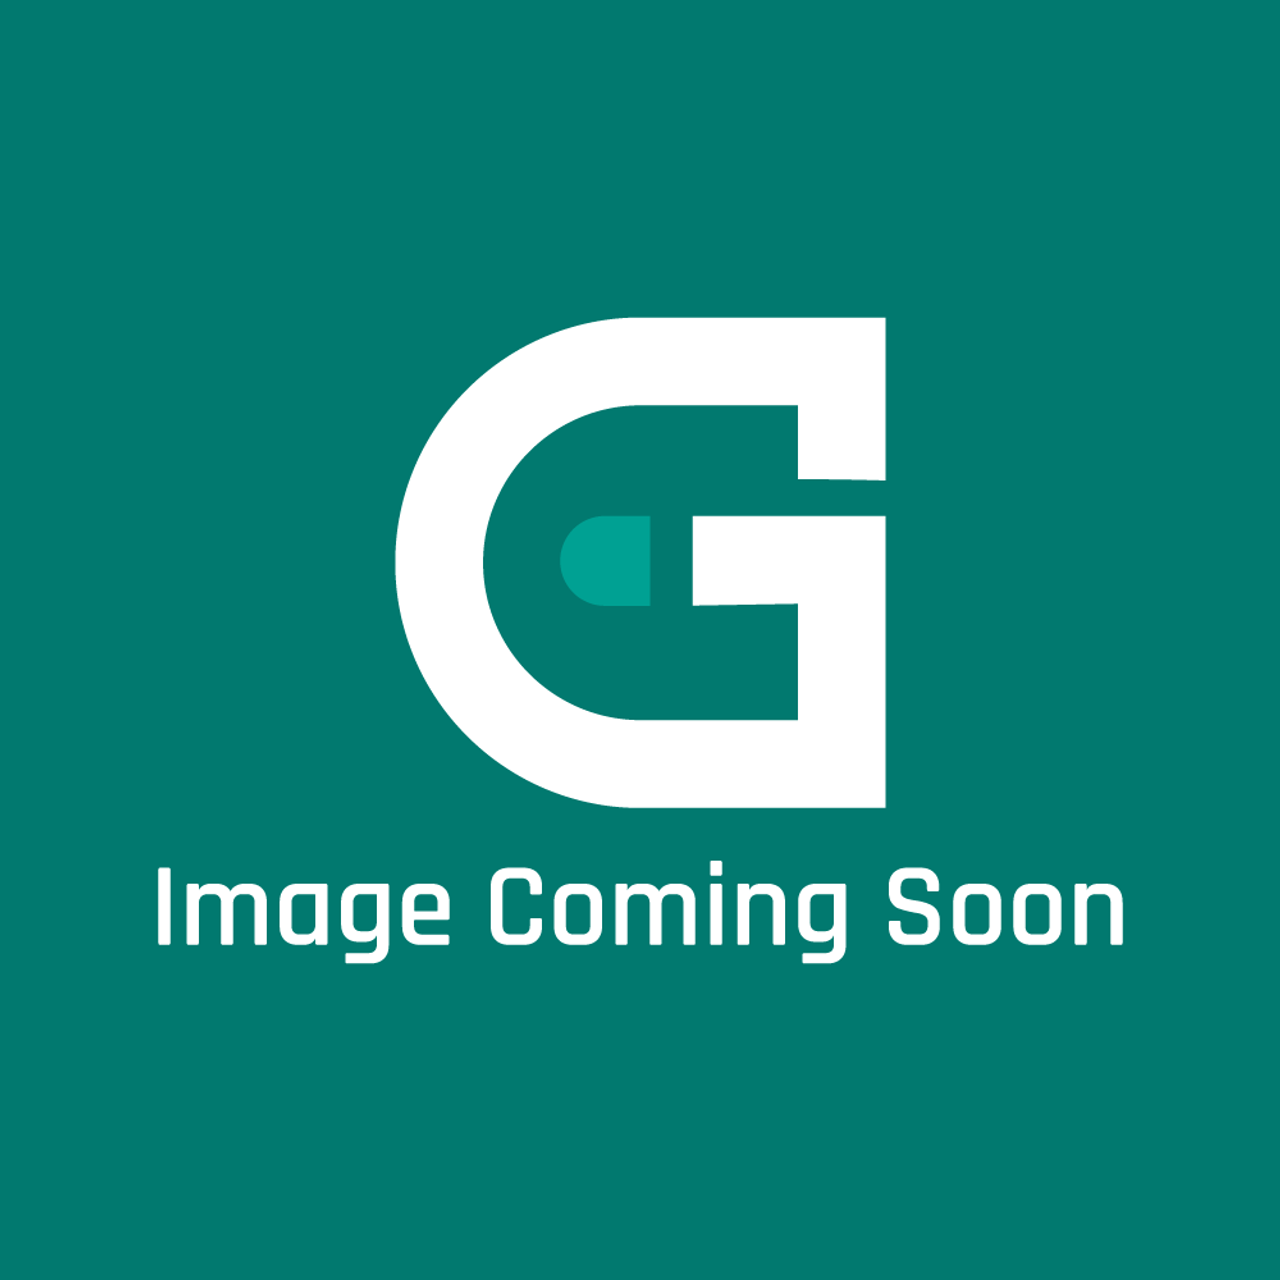 GE Appliances WB56X36606 - Stainless Outer Door - Image Coming Soon!